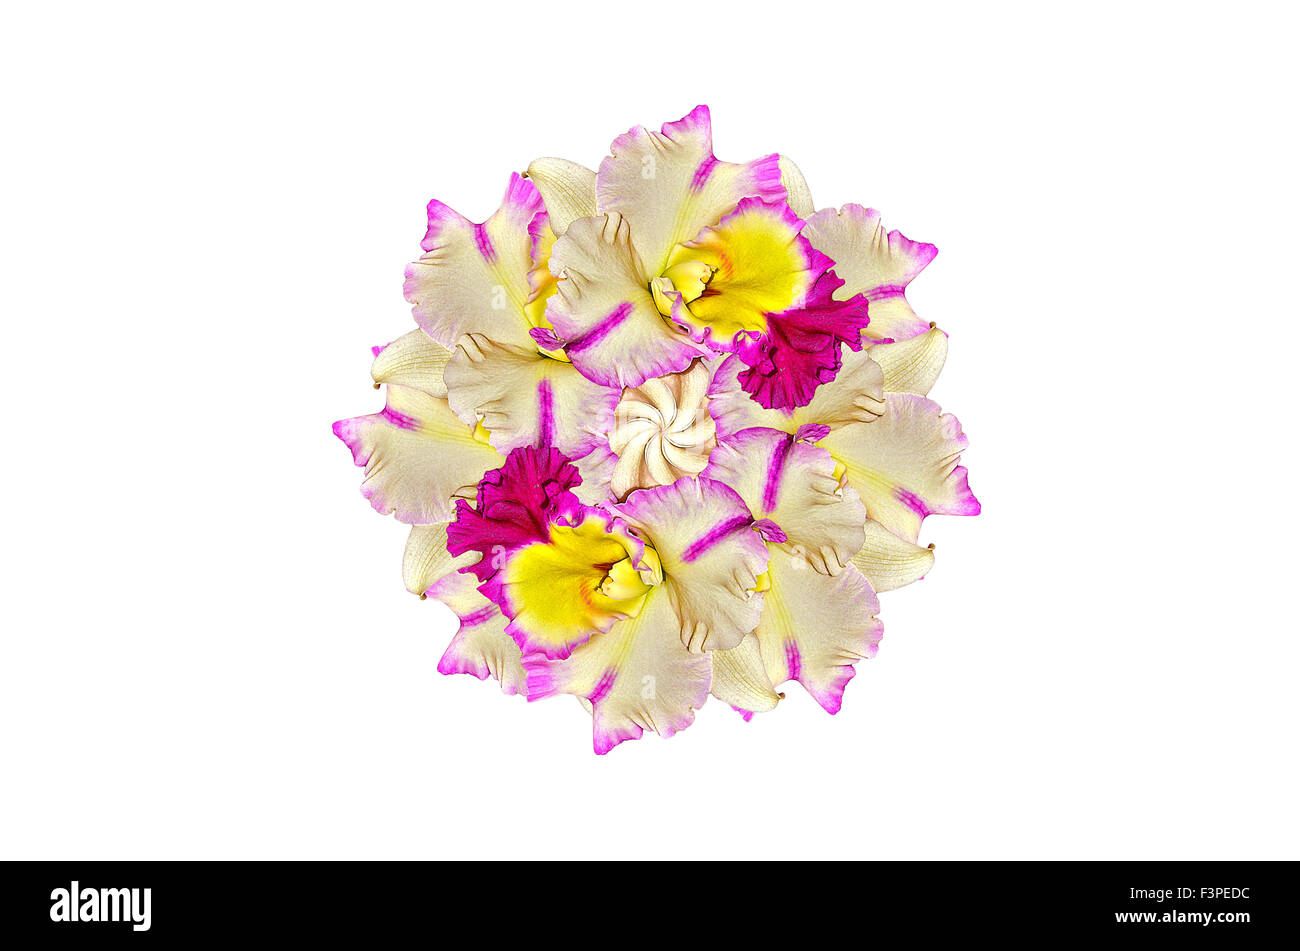 Cattleya Orchid on white background Stock Photo